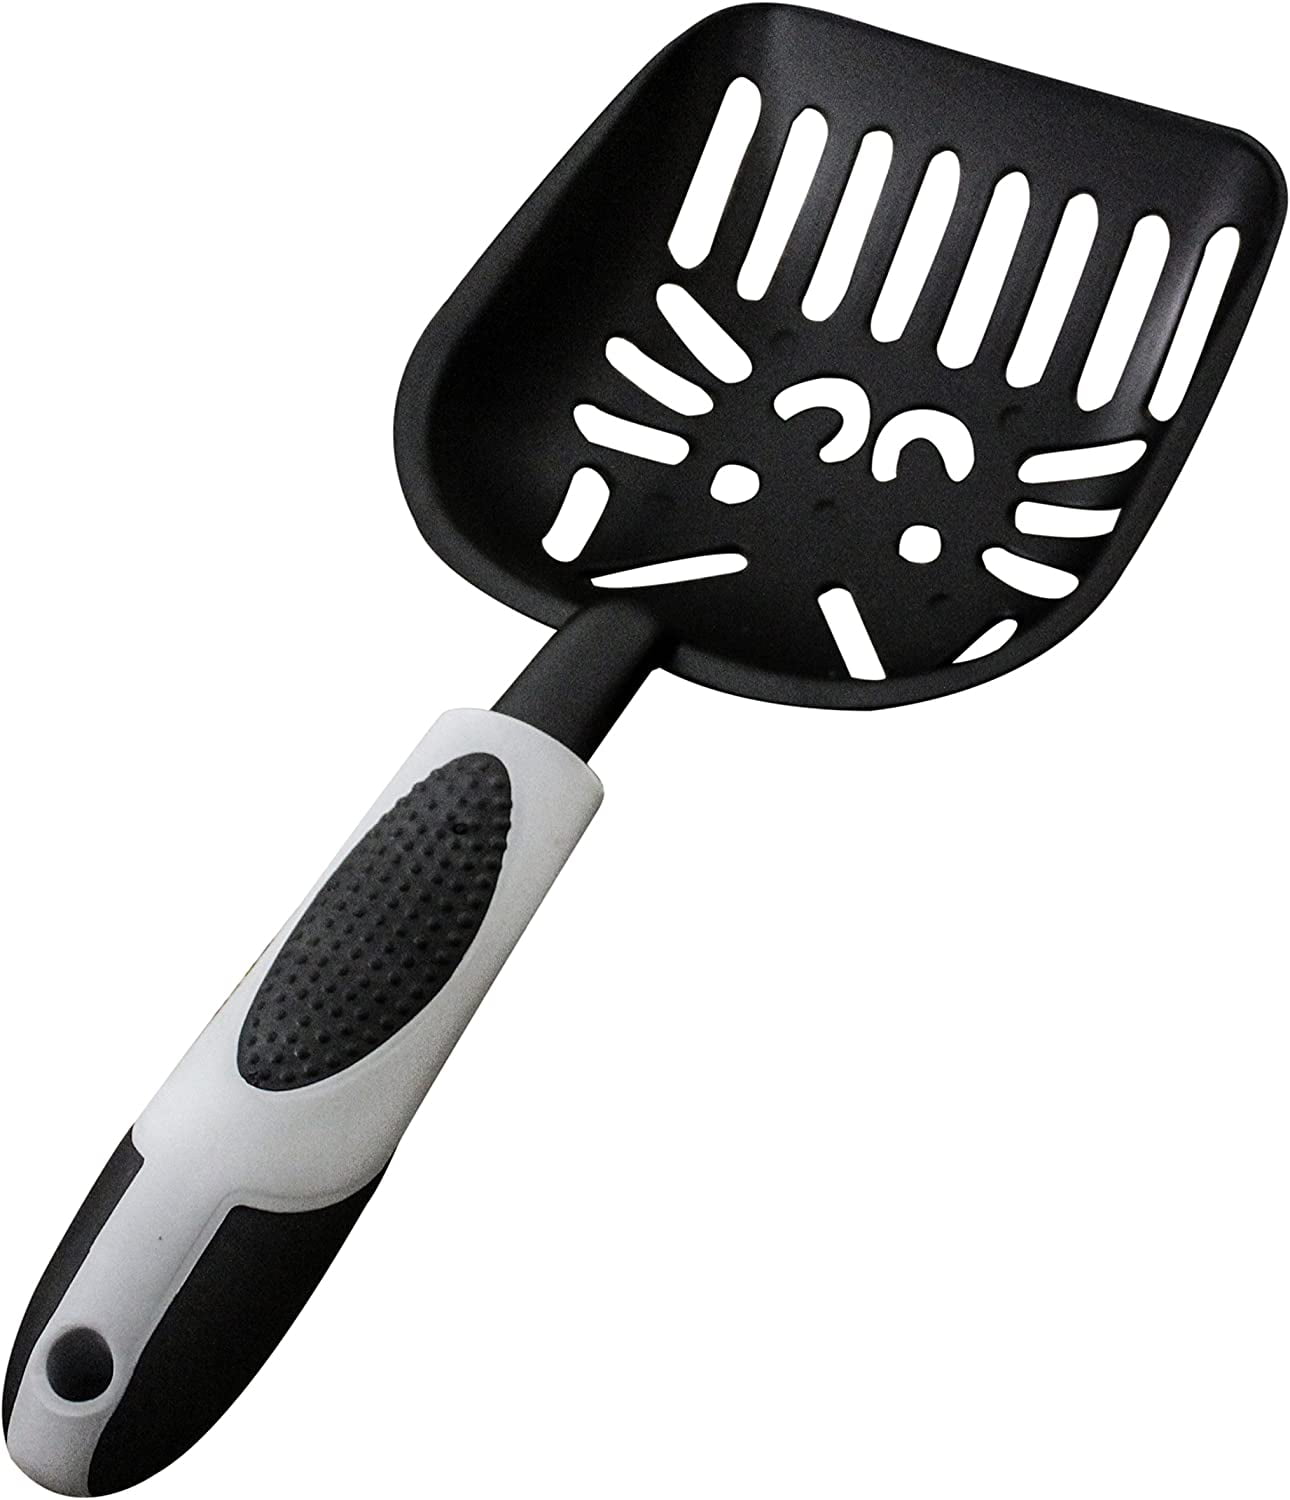 The new Large Cat Litter Scoop Jumbo Sifter with Deep Shovel Non Stick heavyDuty 